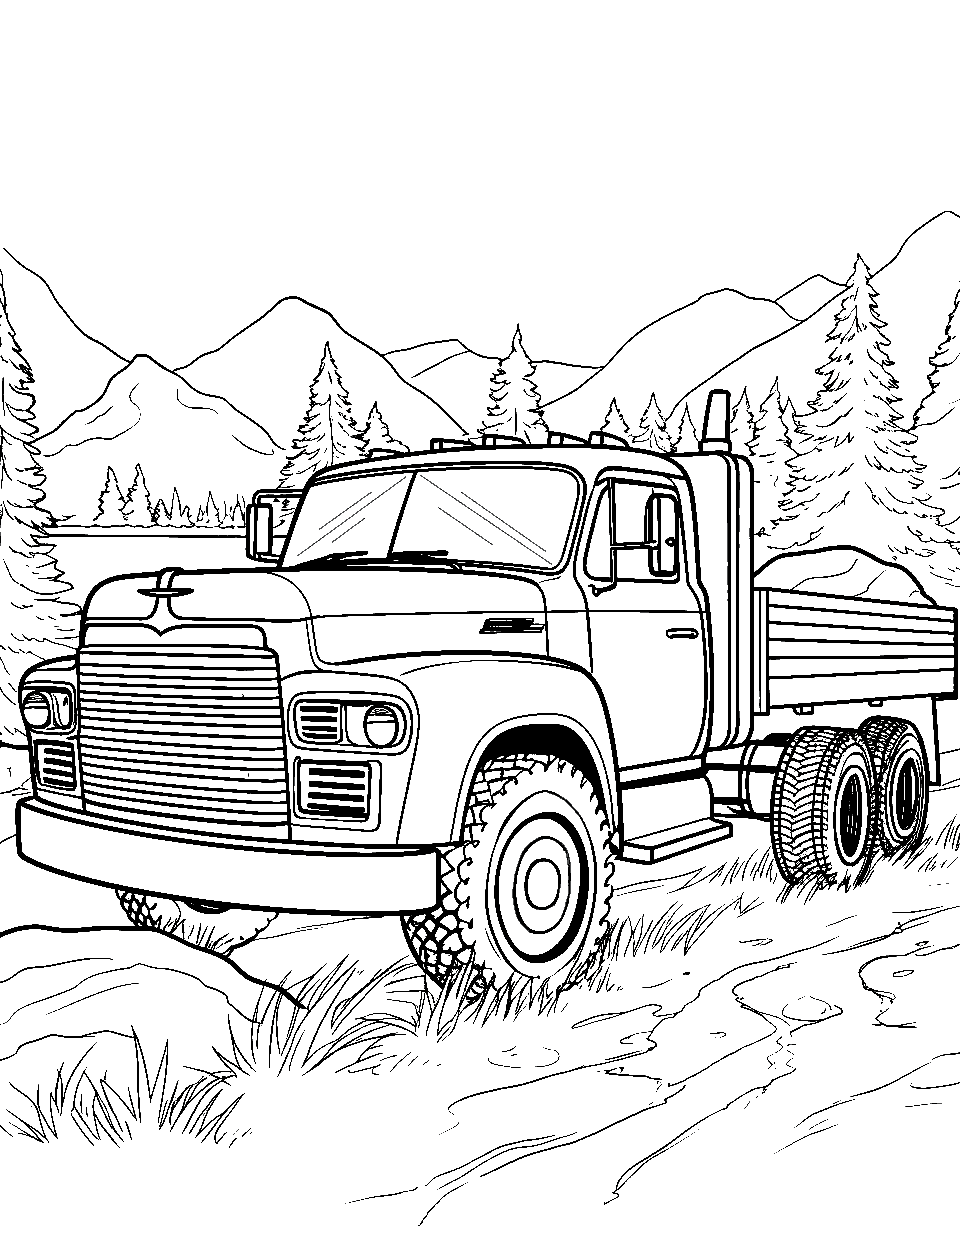 Fishing Trip Coloring Page - A truck parked next to a peaceful river flowing beside its side.